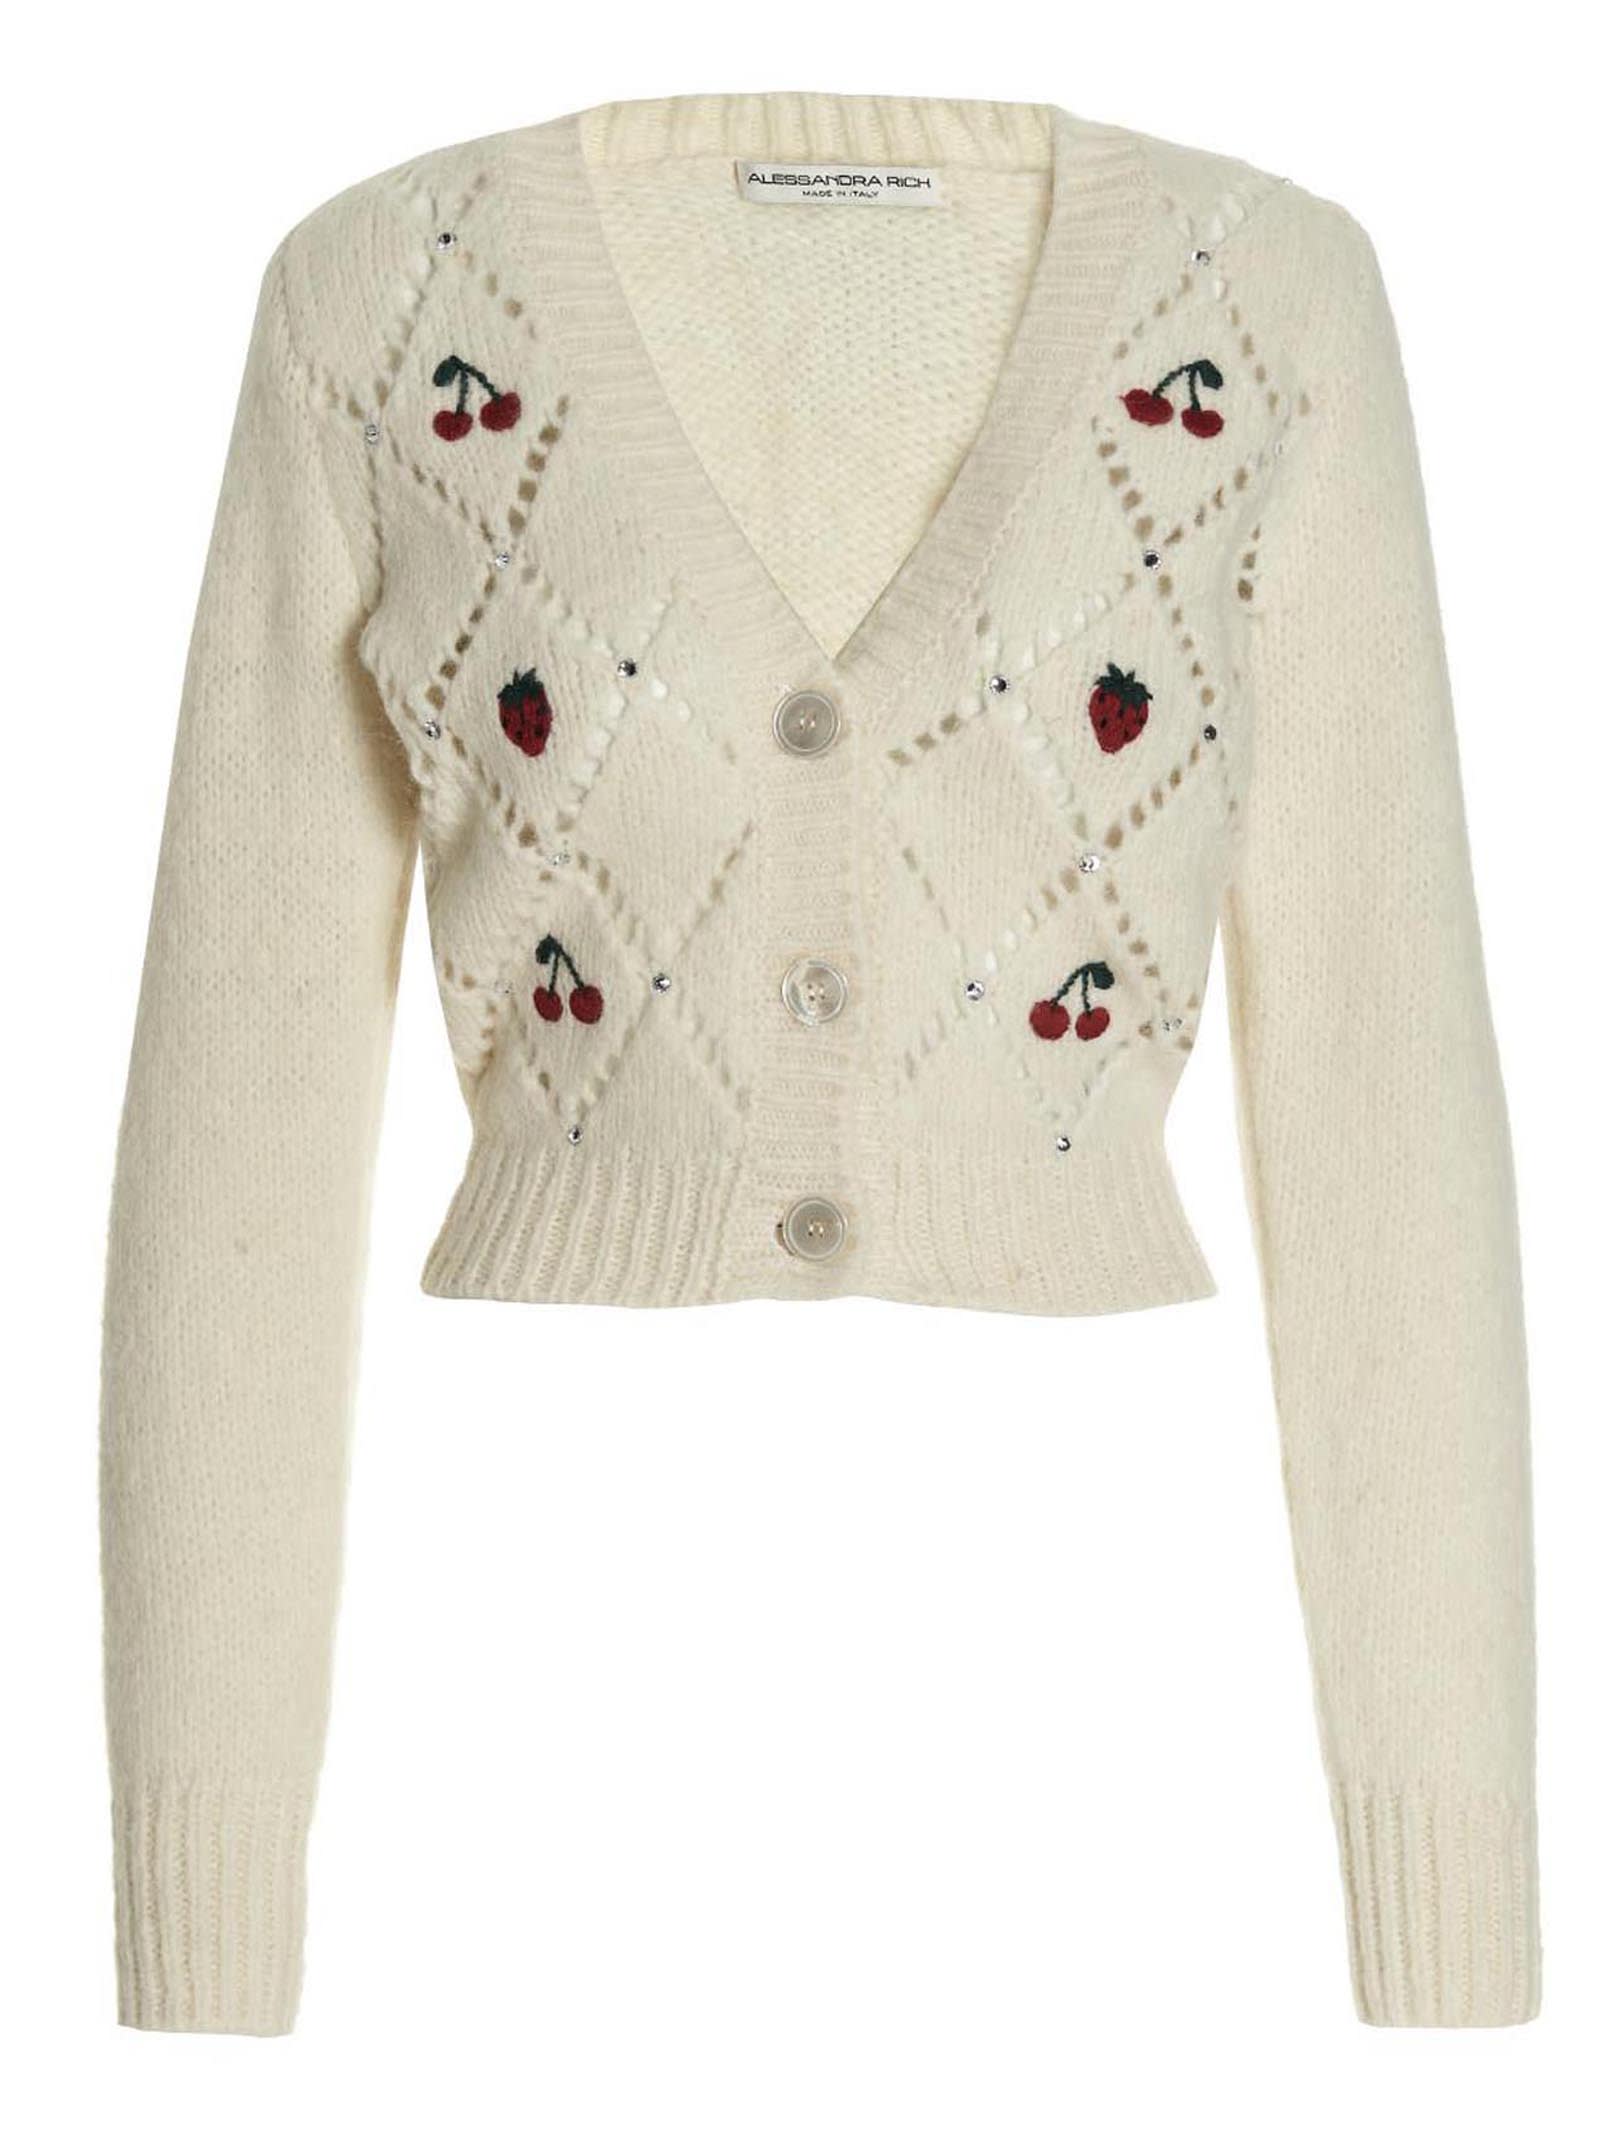 Alessandra Rich Crystal Fruit Embroidery Cardigan